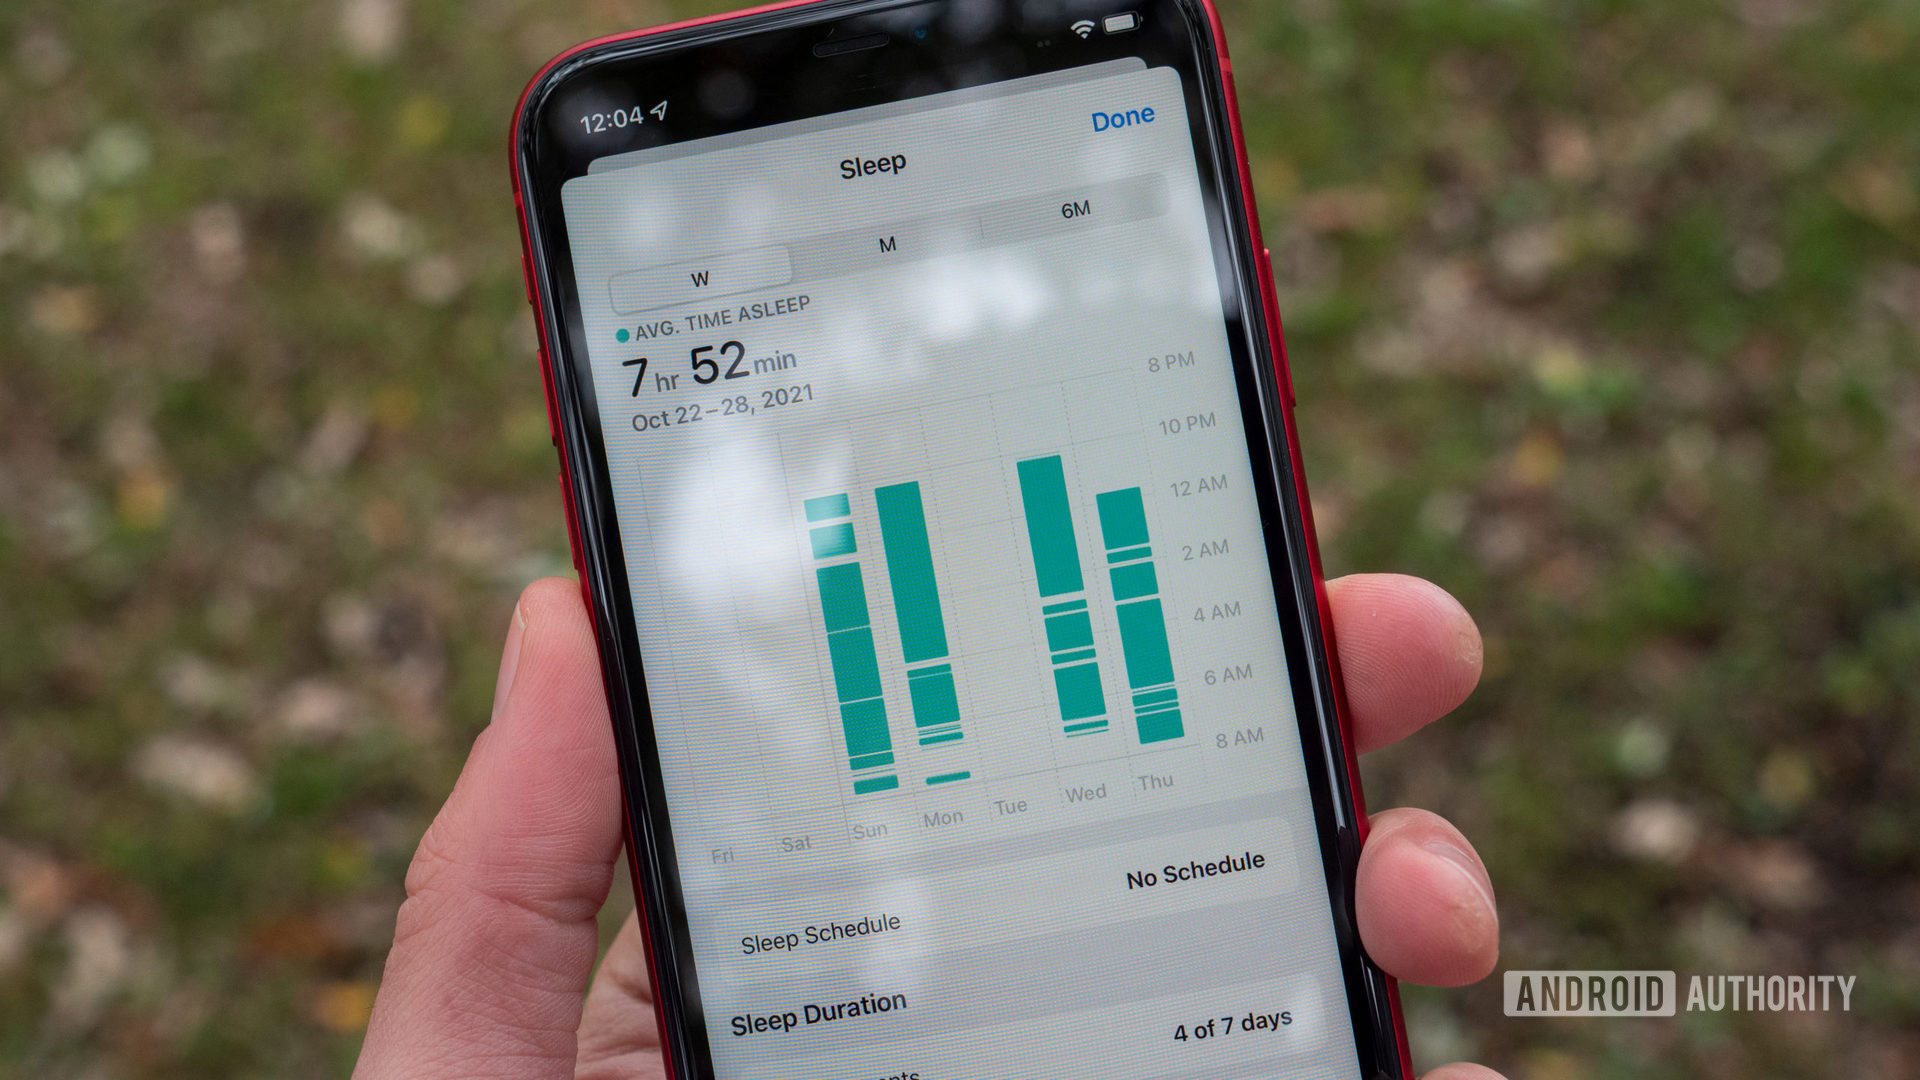 The Apple Health app on iPhone 11 shows the user's sleep tracking data.